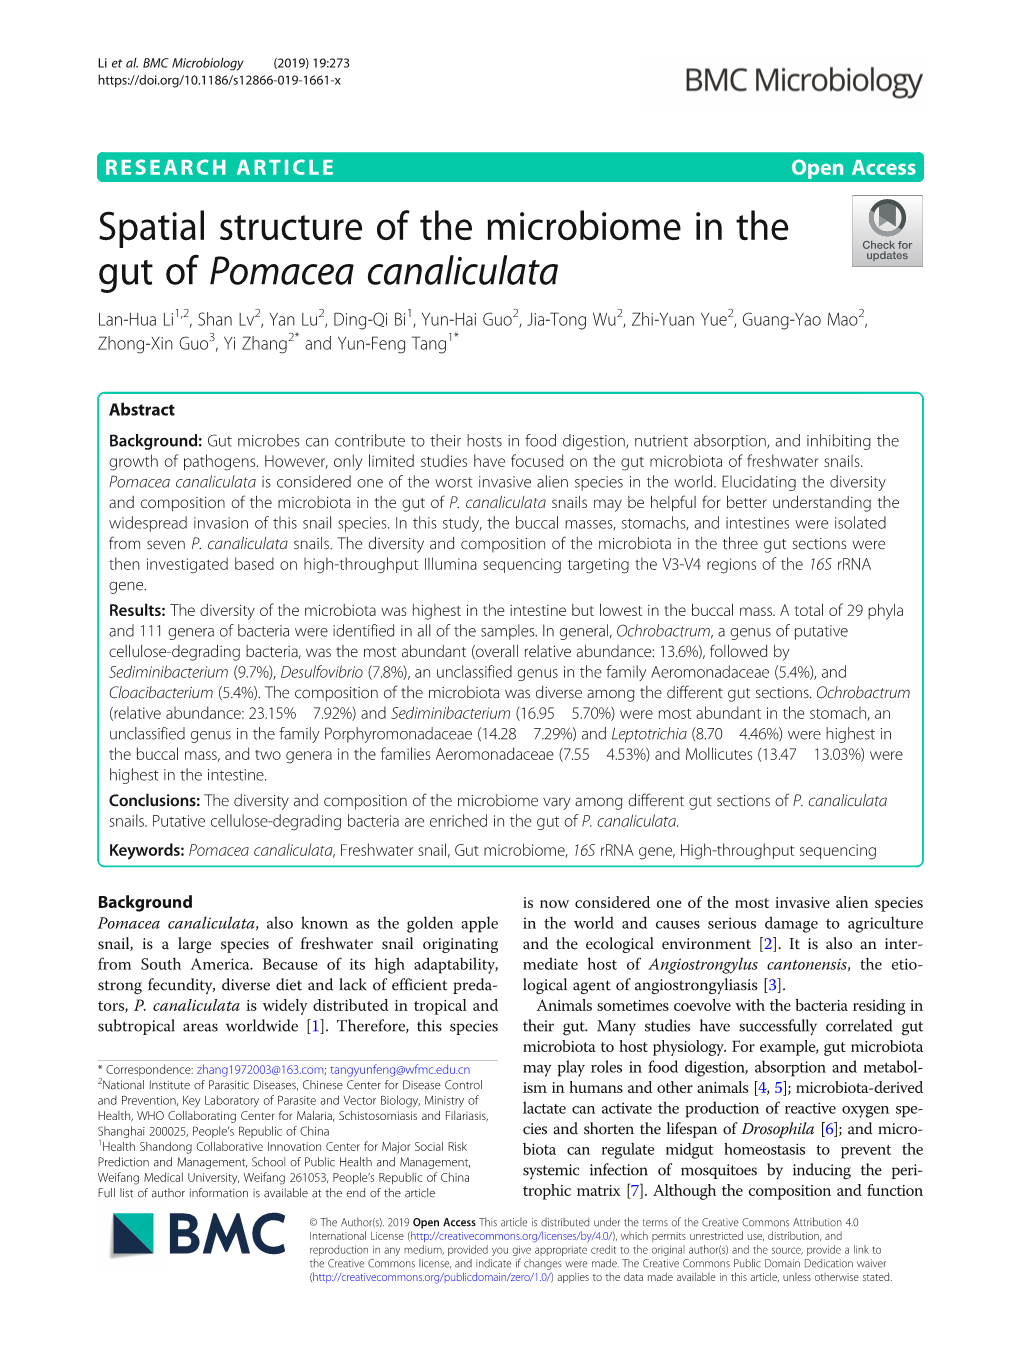 Spatial Structure of the Microbiome in the Gut of Pomacea Canaliculata